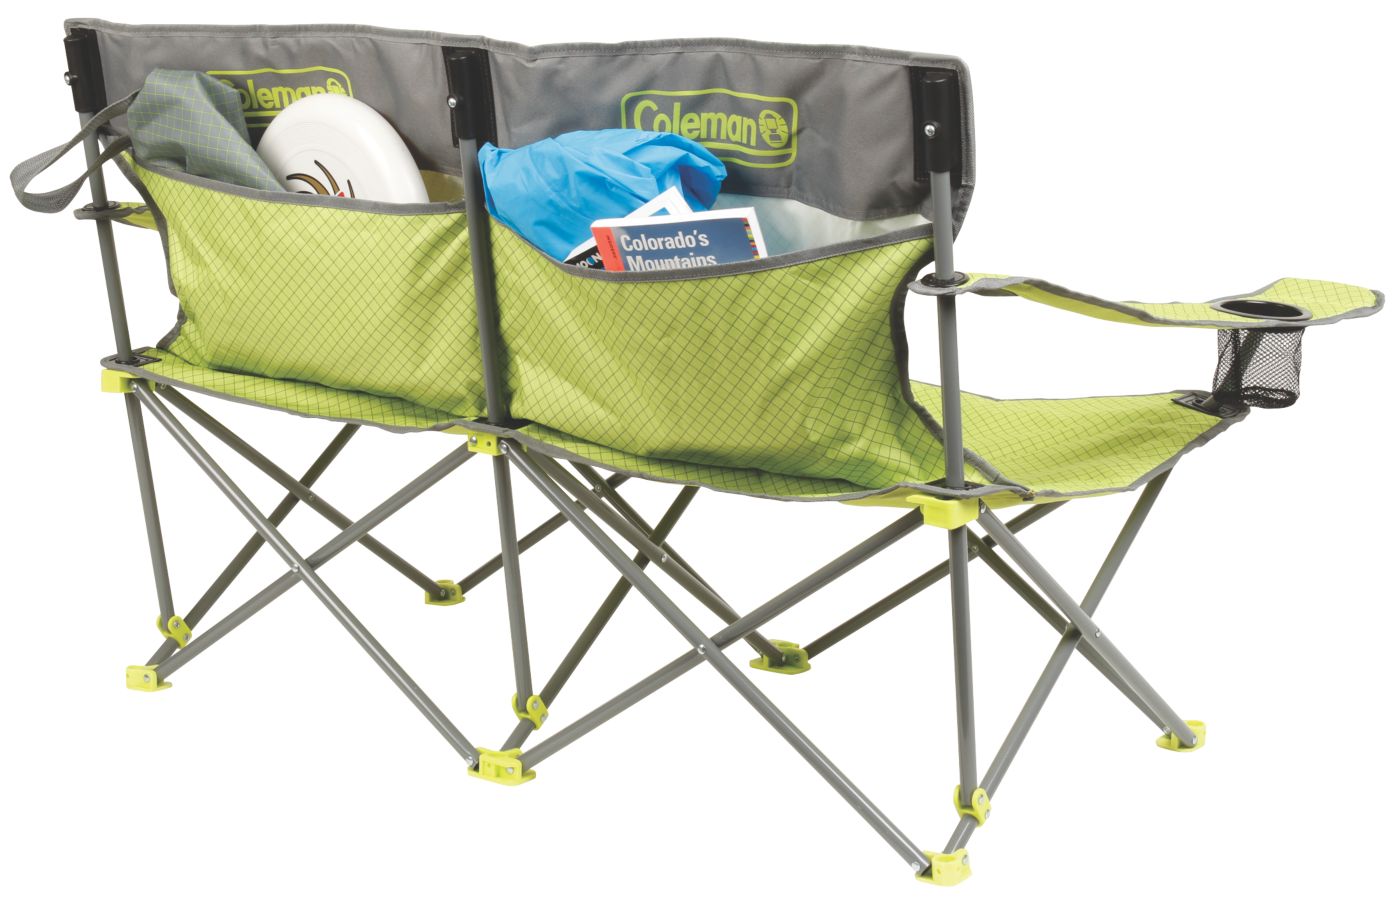 2 seater camping chair